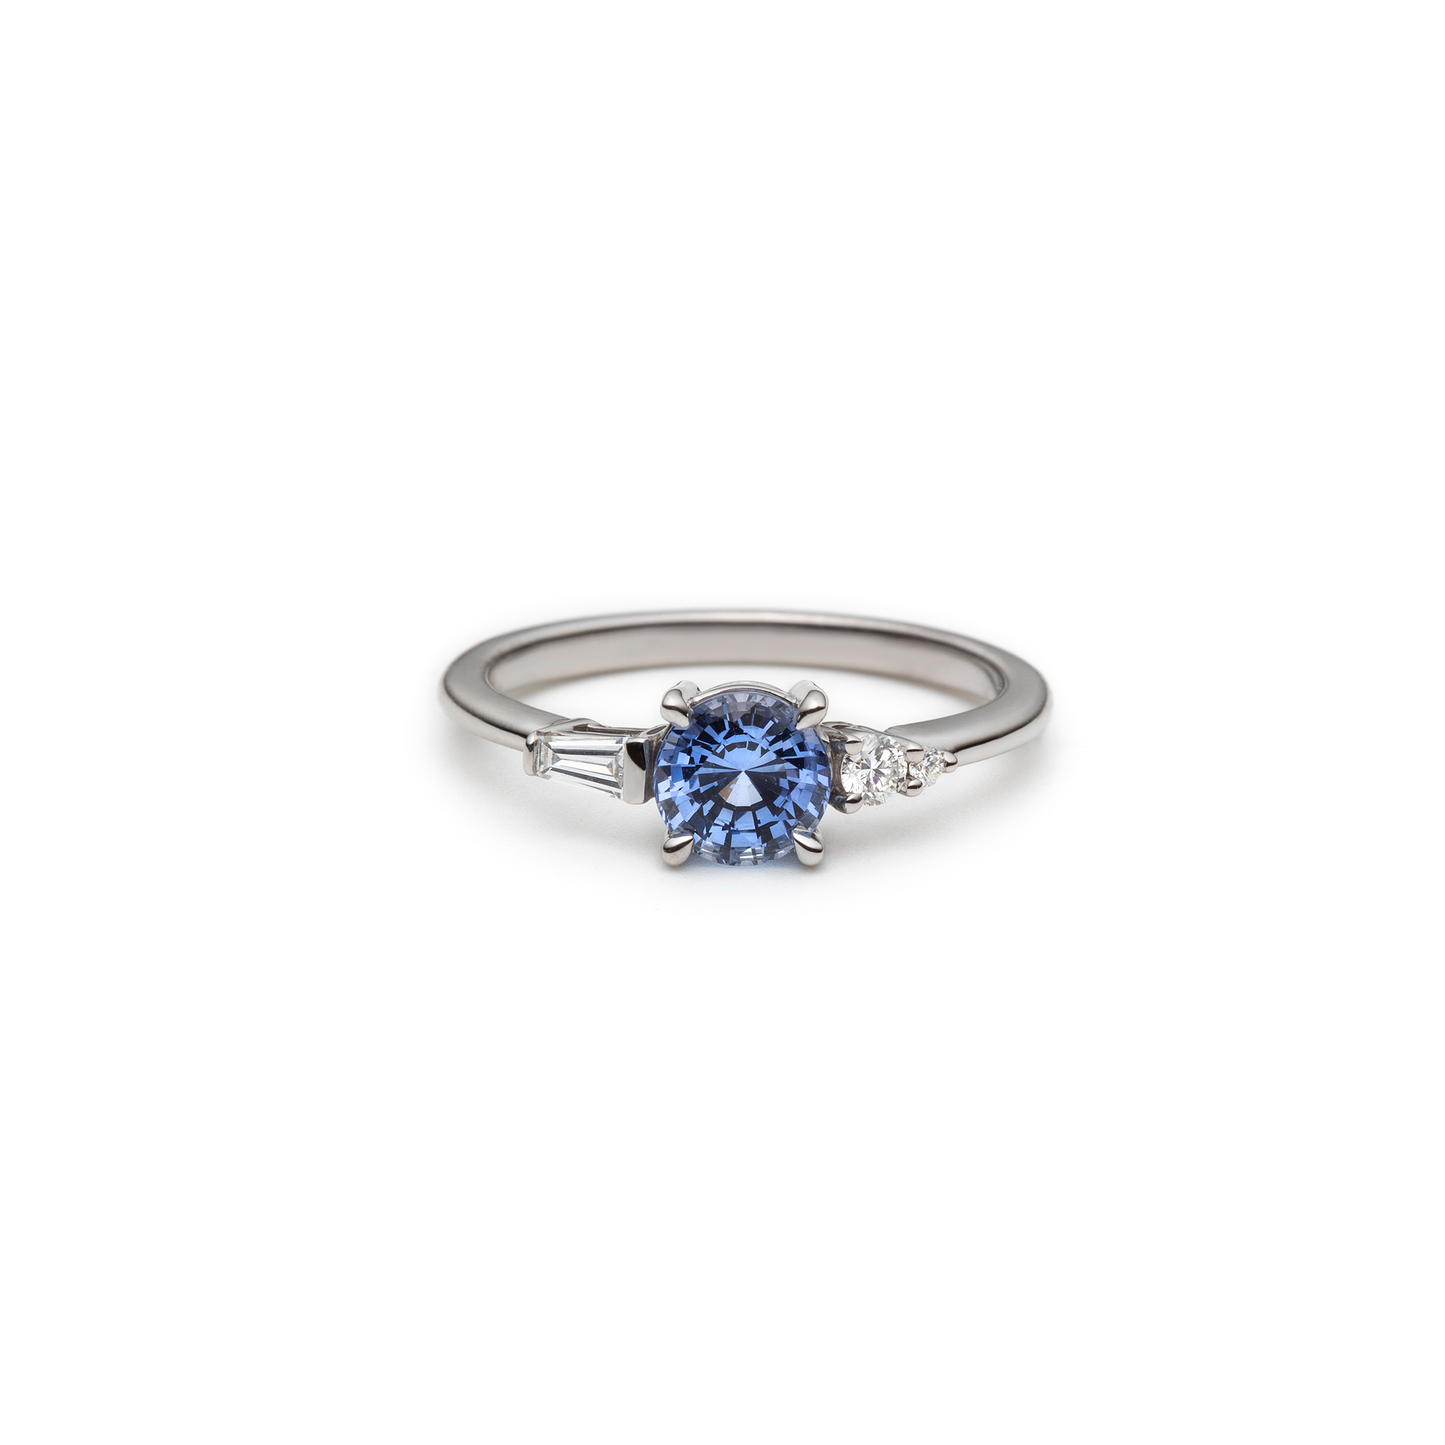 One of a Light Blue Sapphire and Diamond Asymmetric Ring